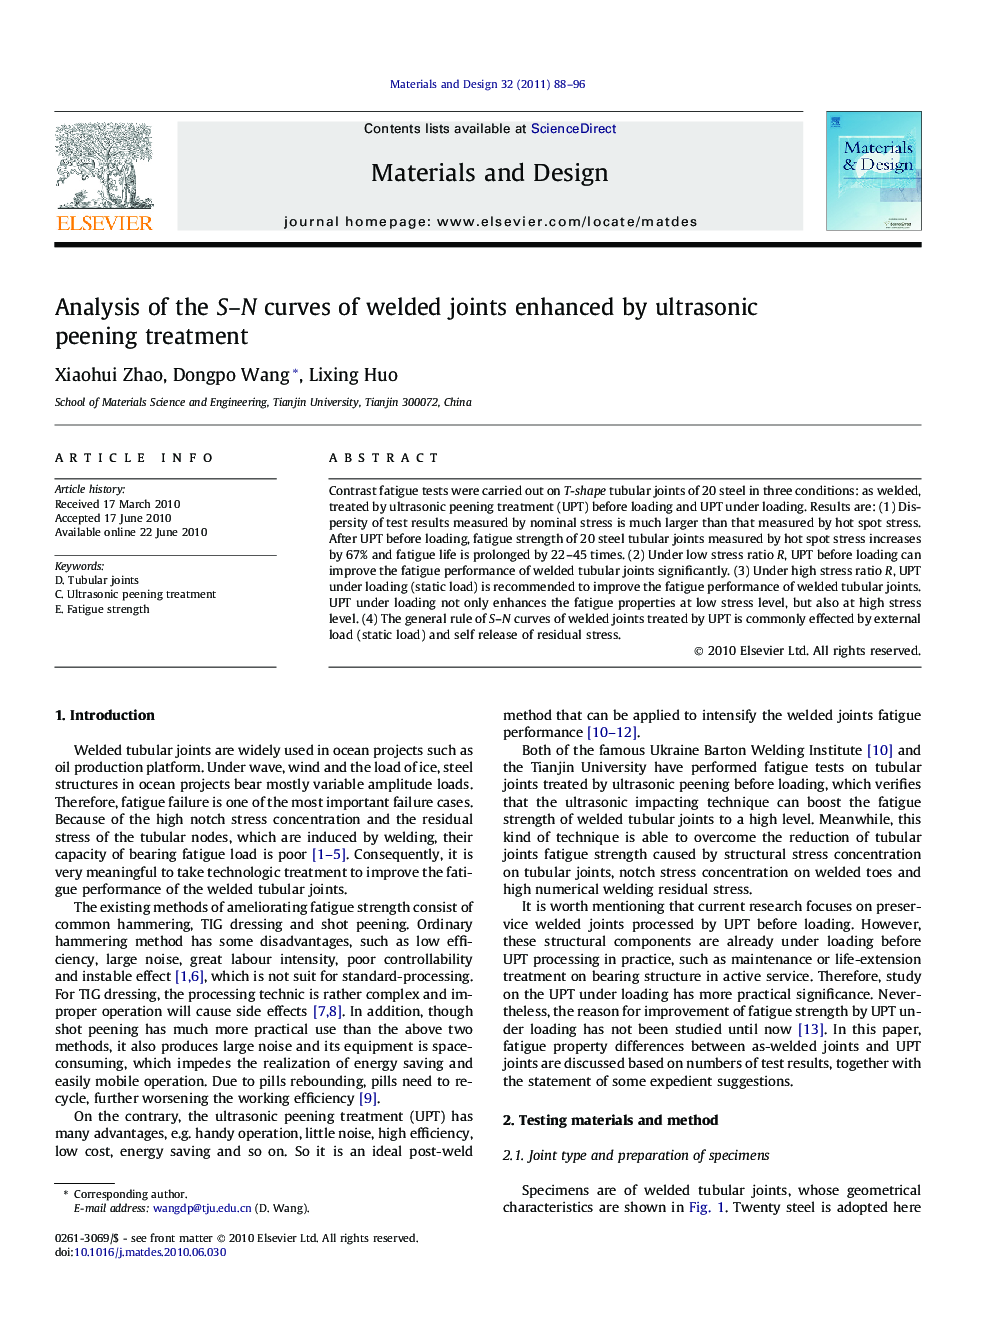 Analysis of the S–N curves of welded joints enhanced by ultrasonic peening treatment